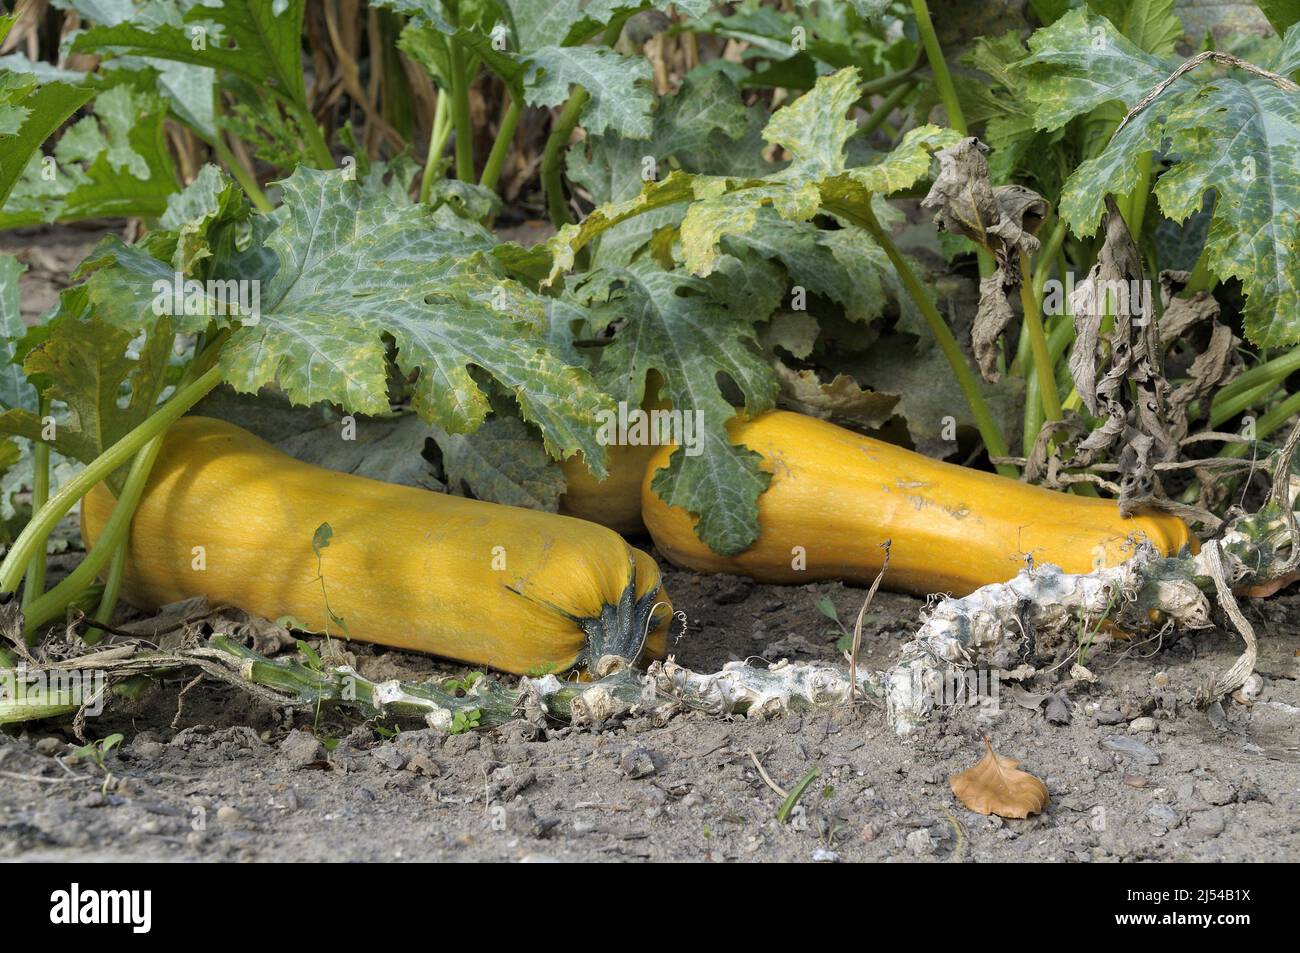 courgette, zucchini (Cucurbita pepo var. giromontiia, Cucurbita pepo subsp. pepo convar. giromontiina), large yellow courgettes at the plant, Germany Stock Photo